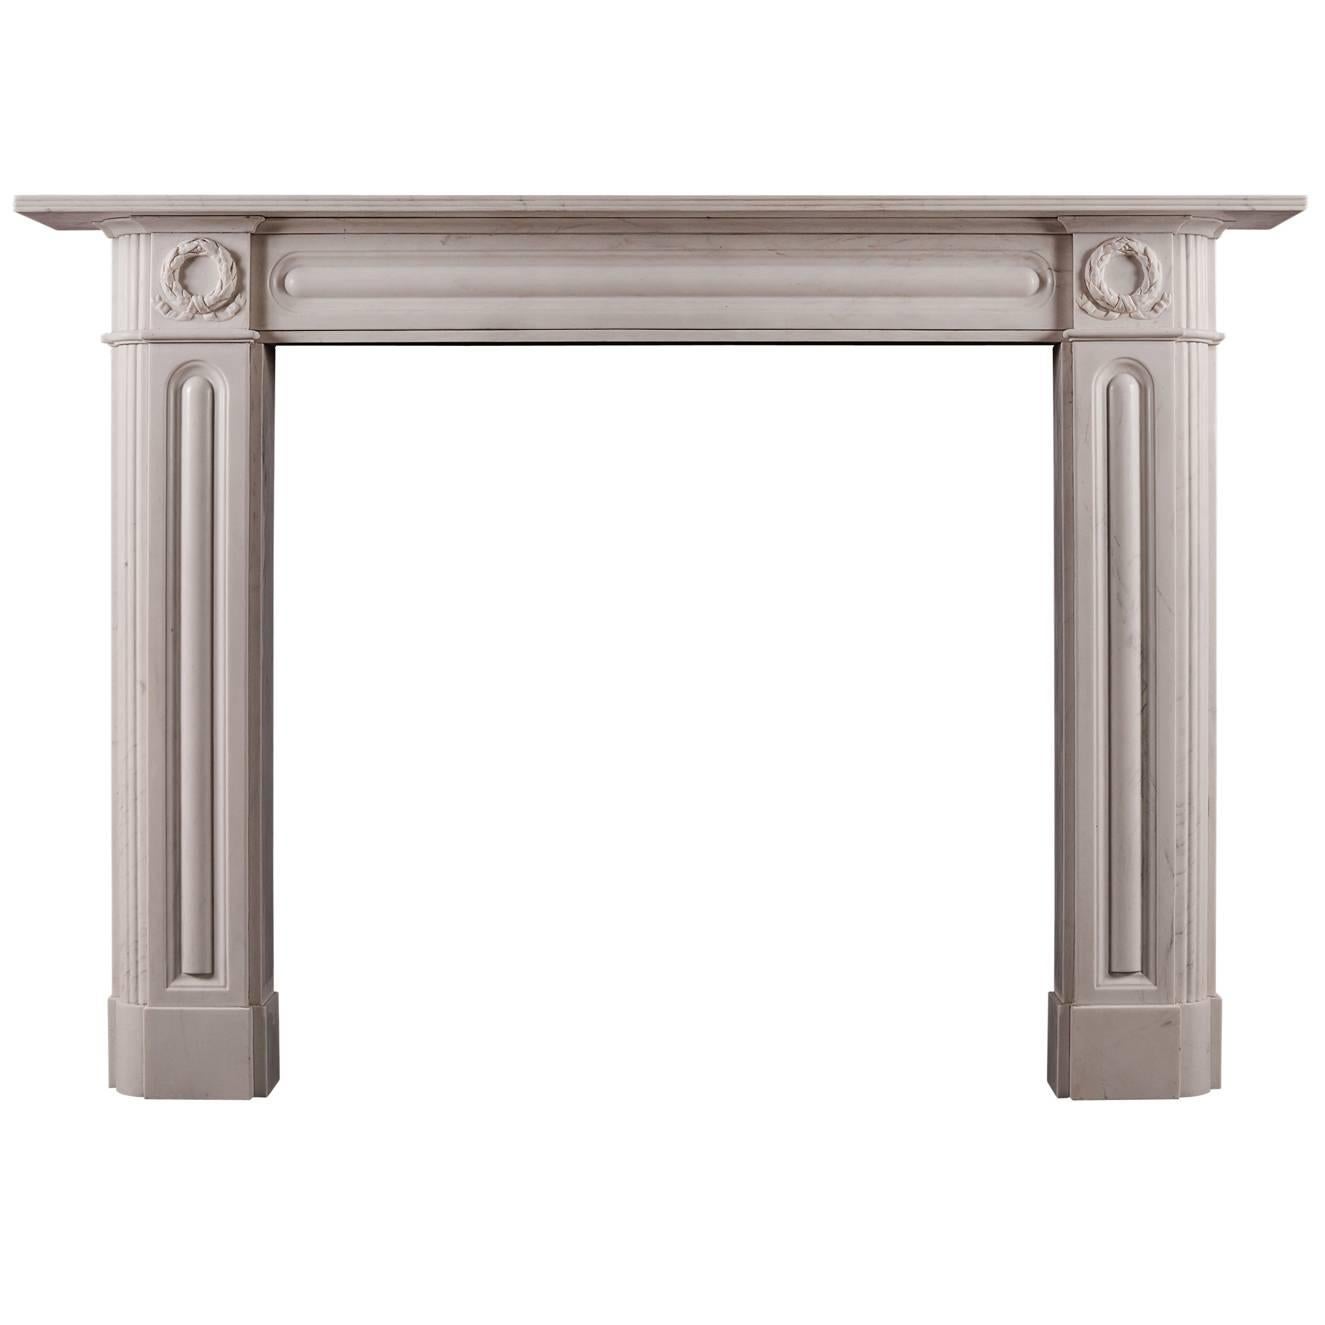 English Regency Marble Fireplace Mantel in White Marble